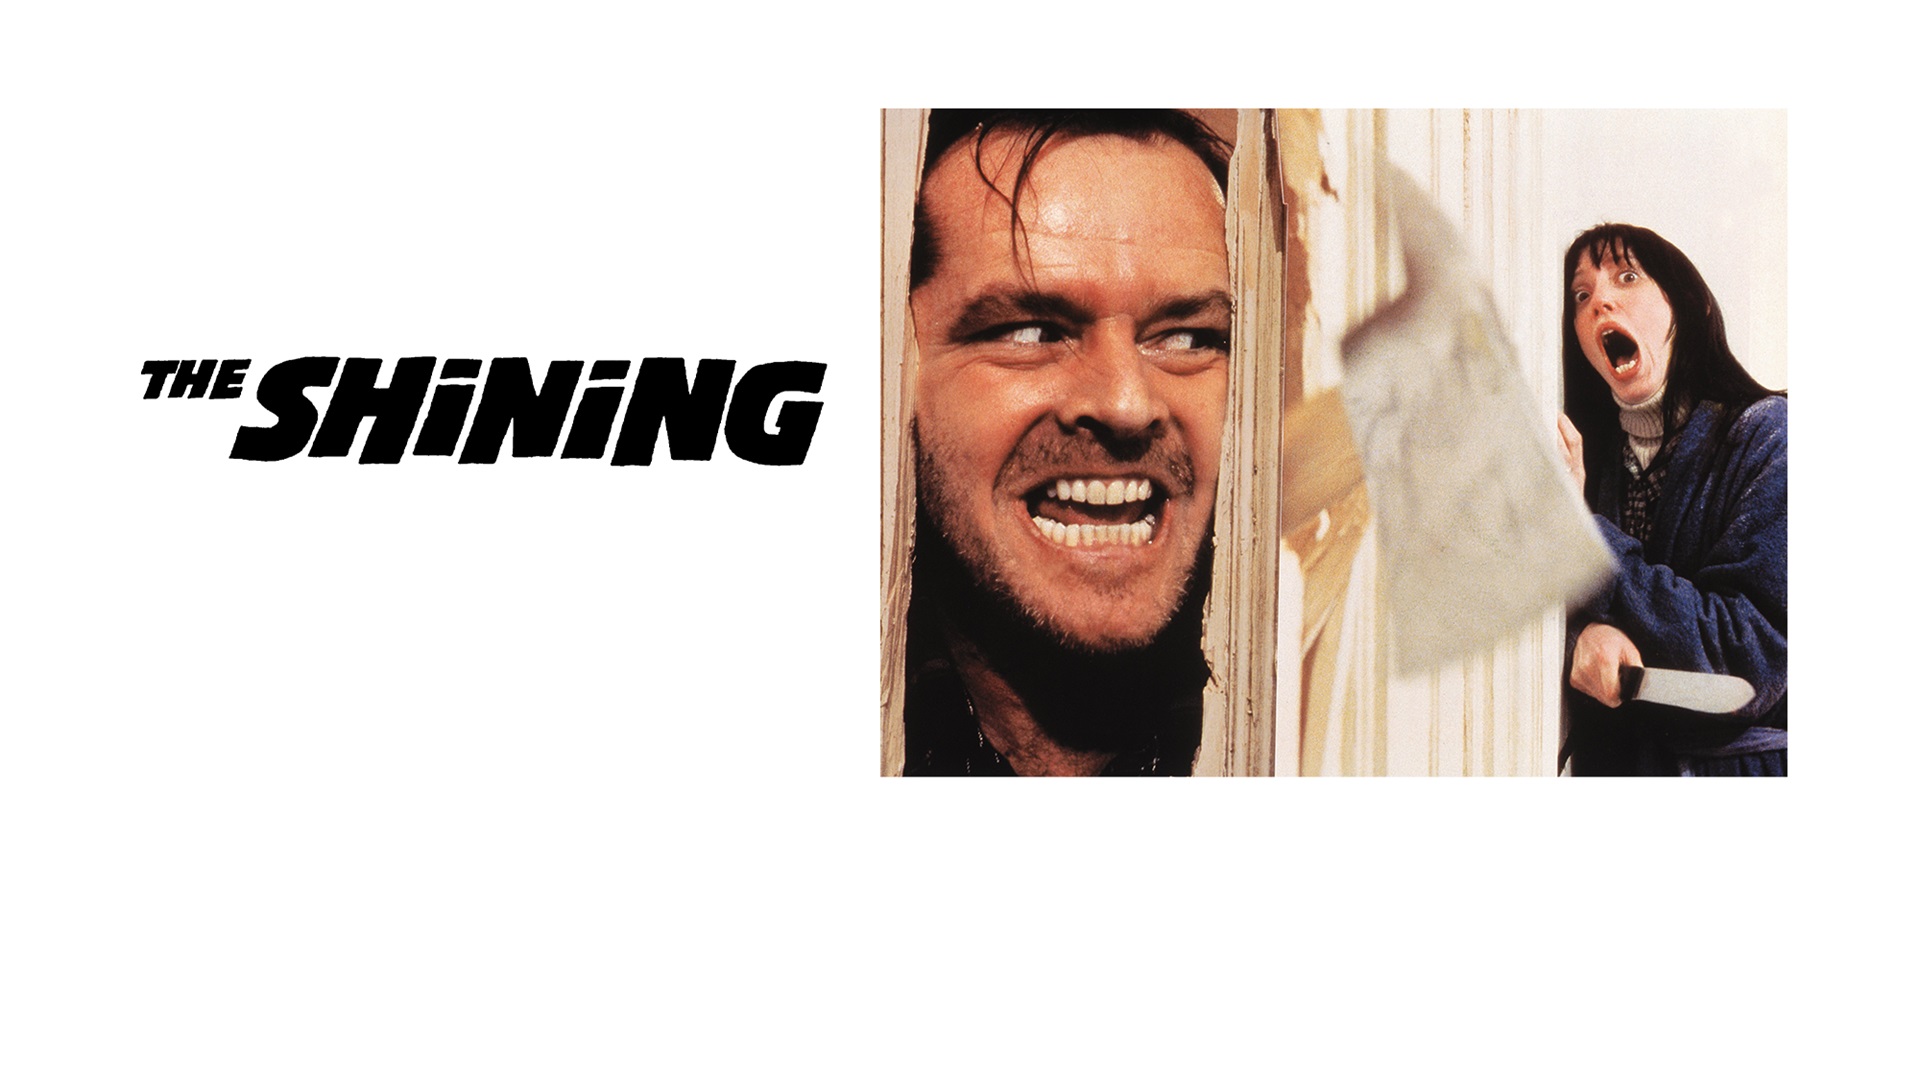 37-facts-about-the-movie-stephen-kings-the-shining